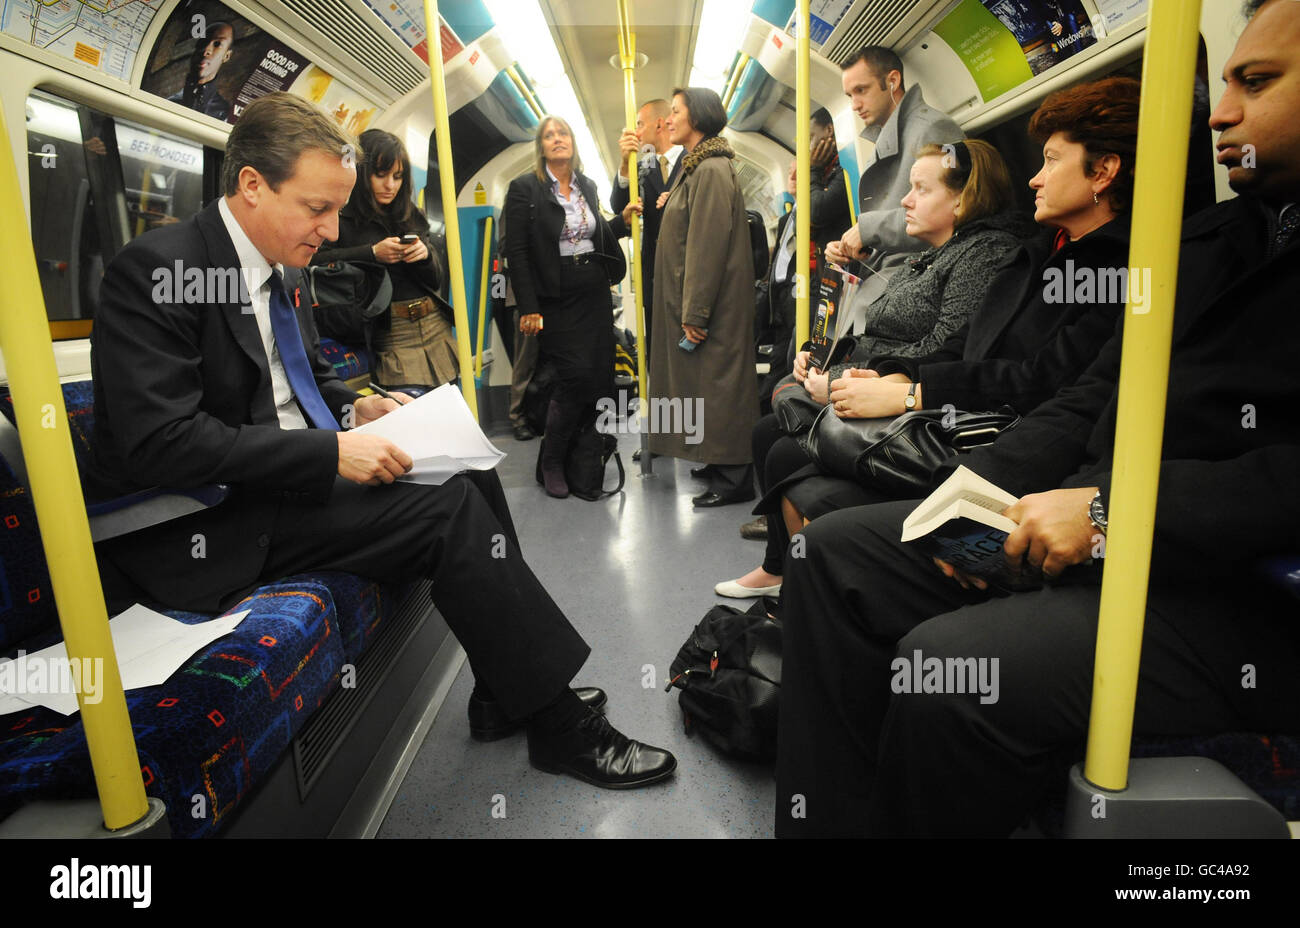 Conservative leader David Cameron travels by tube on the Underground to the O2 Arena in London today where he launched his Tickets for Troops scheme encouraging promoters of music concerts and sporting events to give free tickets to soldiers. Stock Photo